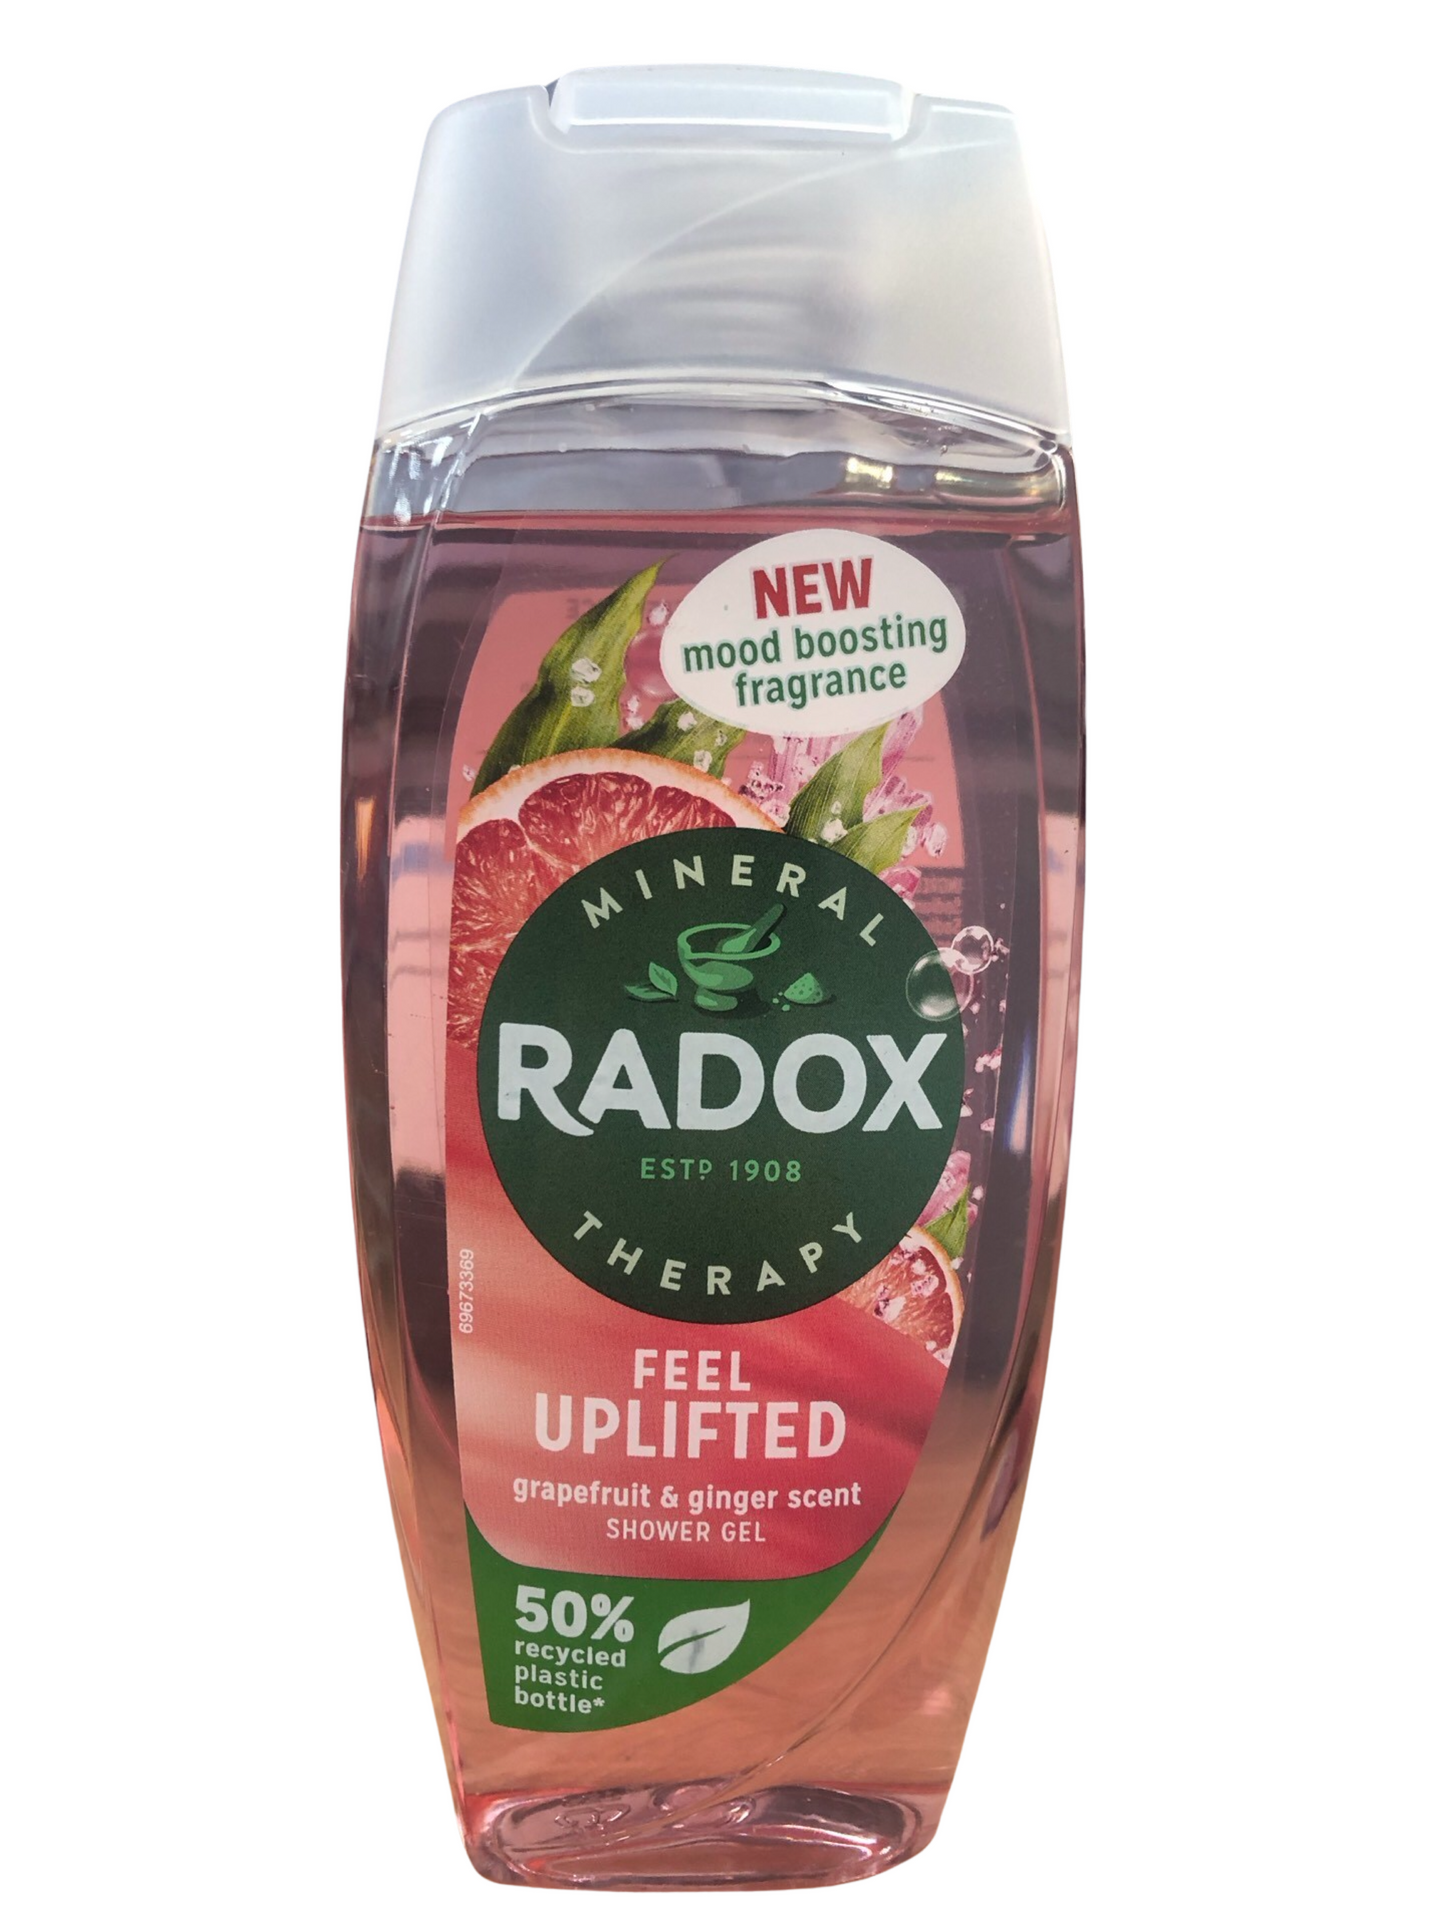 Radox therapy feel uplifted 225ml